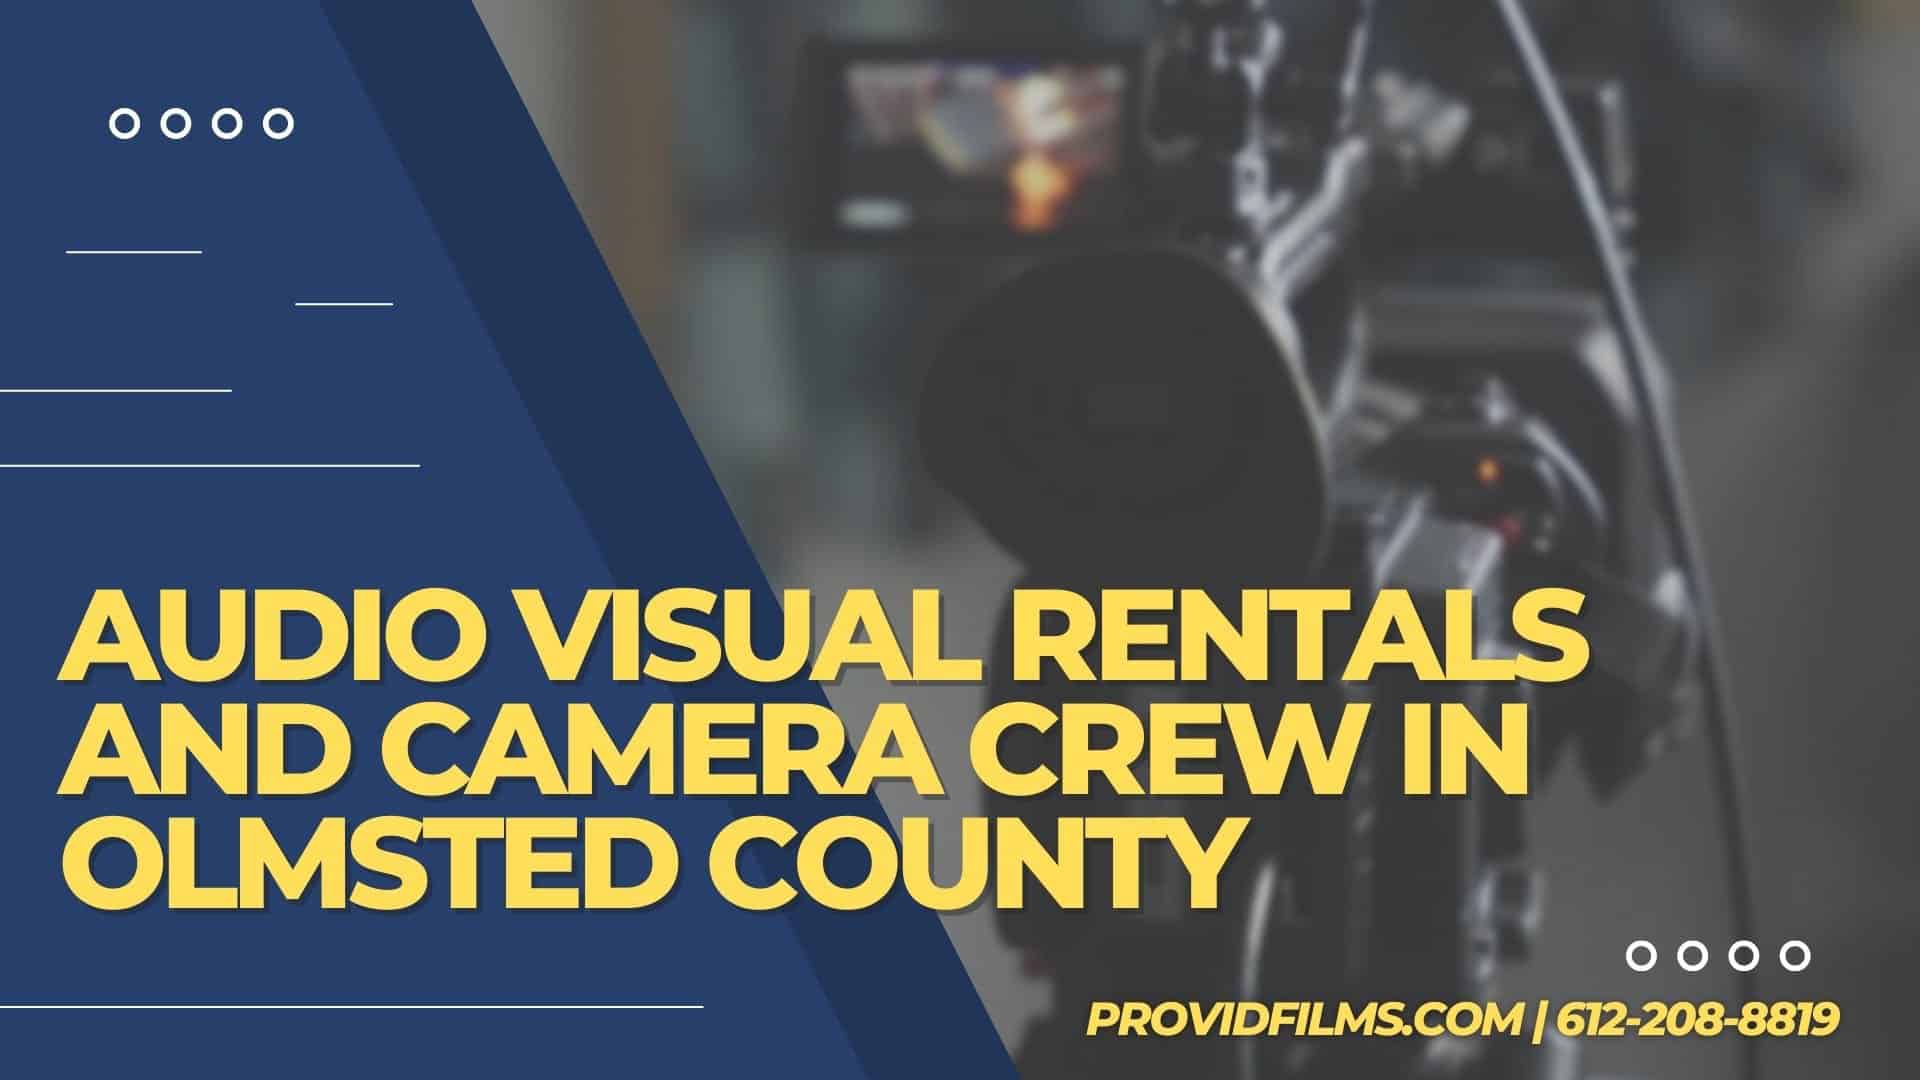 Graphic with a video camera crew with the text saying "AV Rental and Camera Crew in Olmsted County"